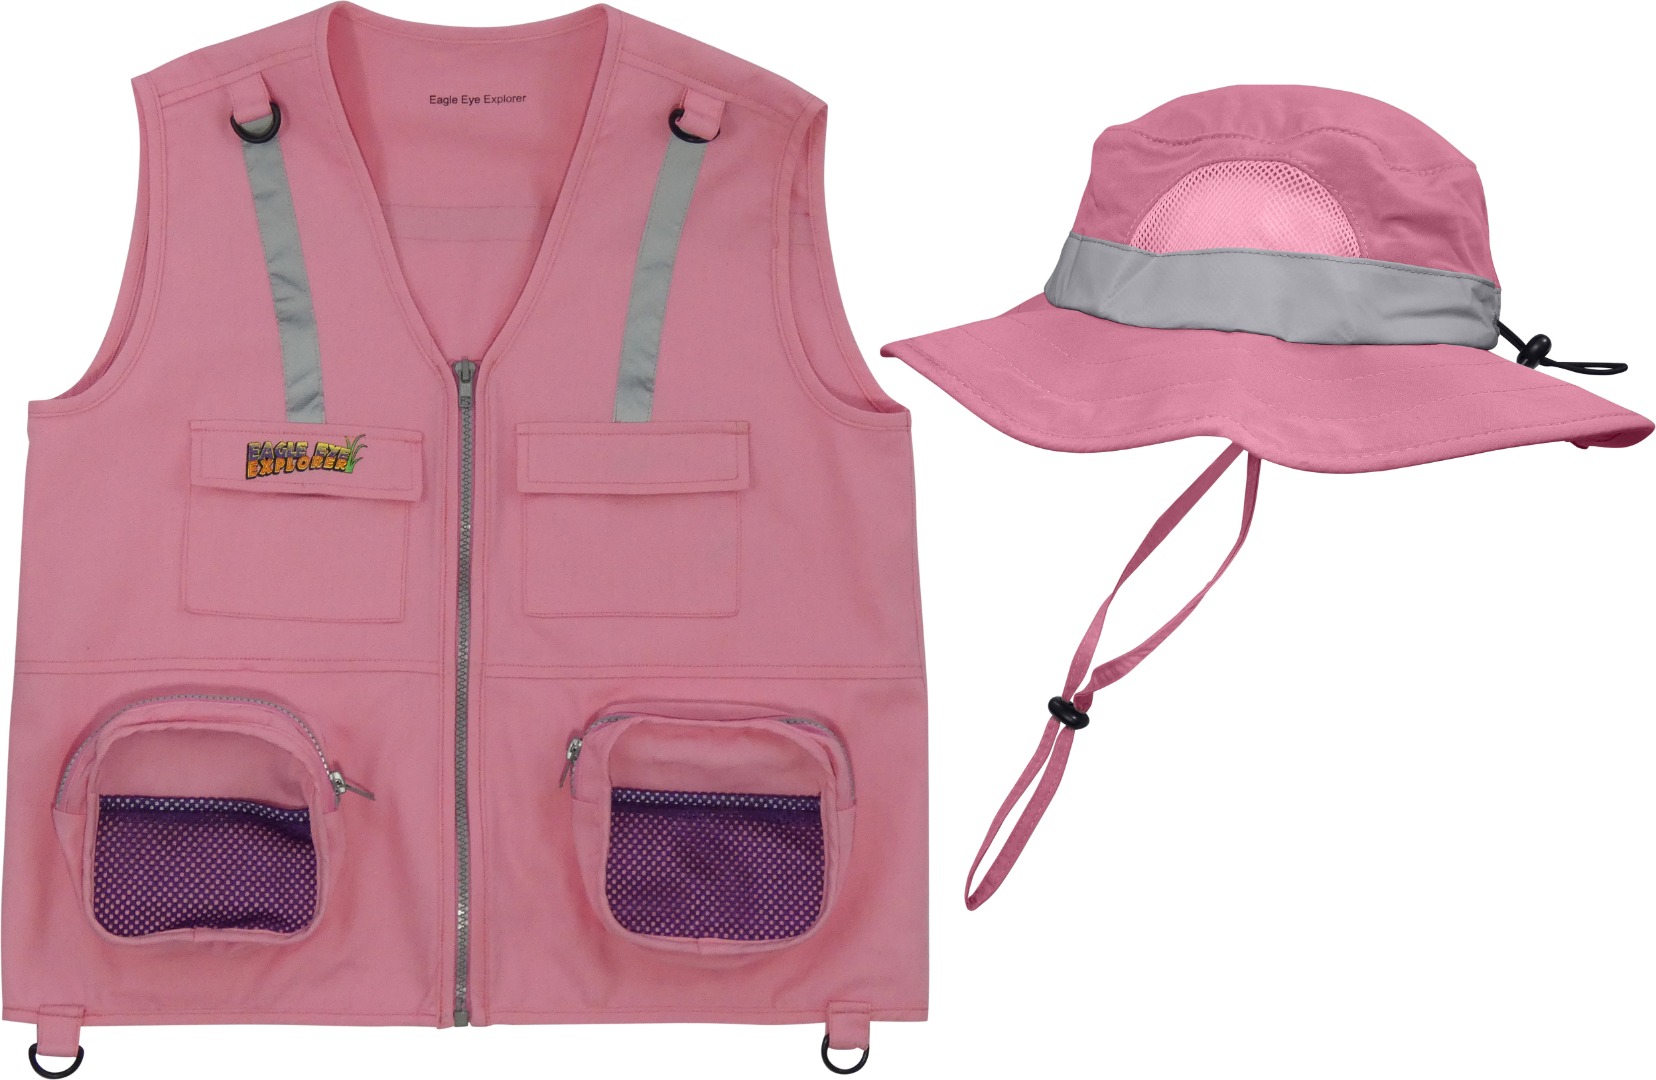 Fishing Outdoor Exploration and Play Includes 100% Cotton Vest and Large Brim Protective Hat Hunting Eagle Eye Explorer Boys and Girls Youth Safari Combination Set Perfect for Troops 